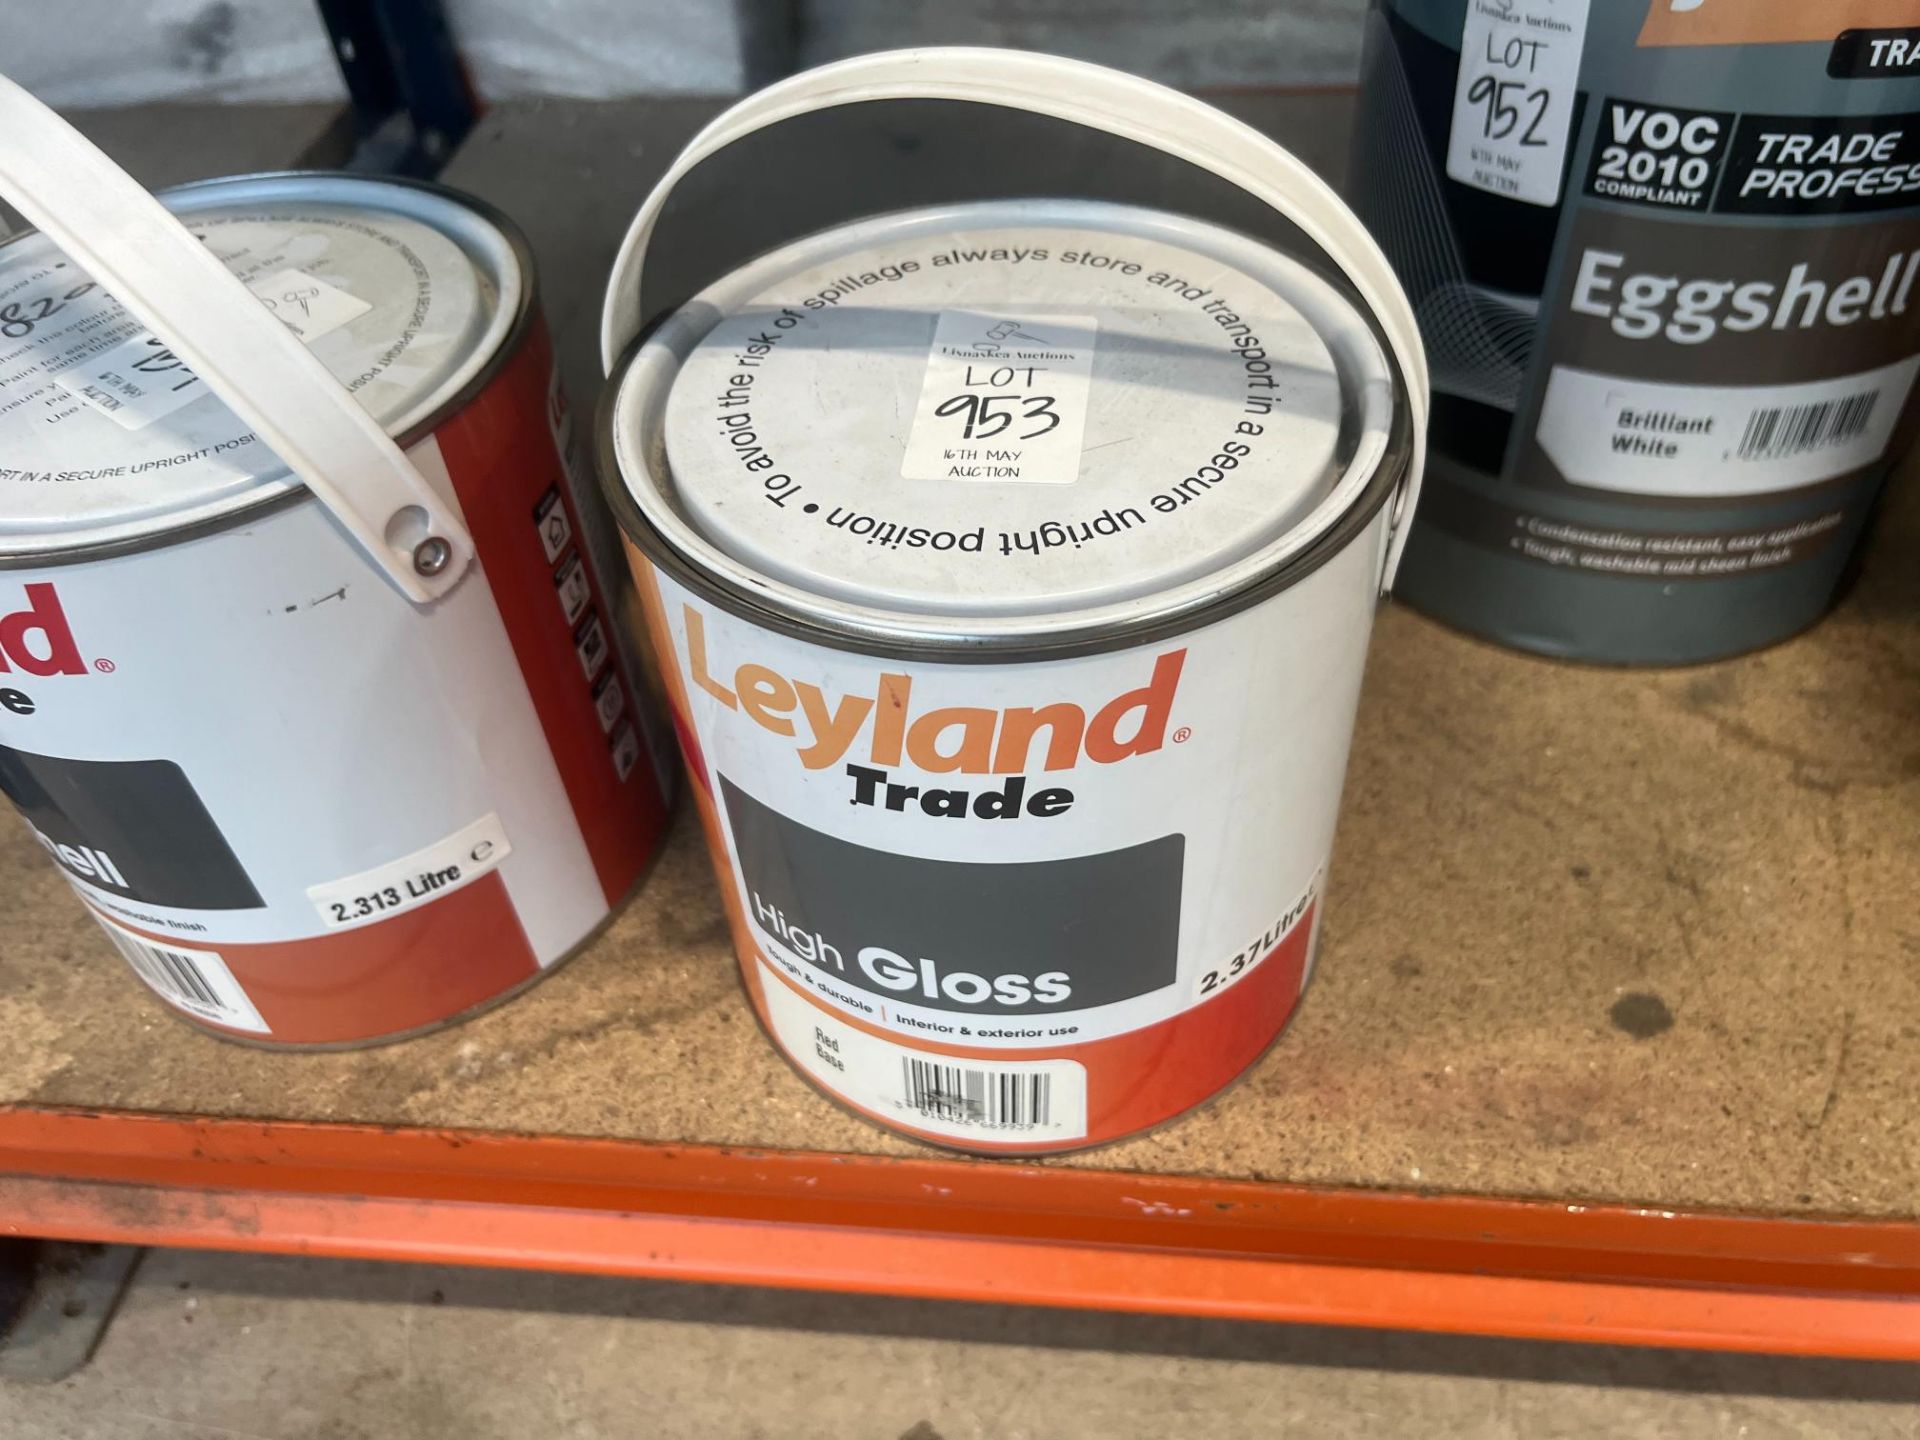 2.37L OF LEYLAND TRADE HIGH GLOSS RED BASE PAINT